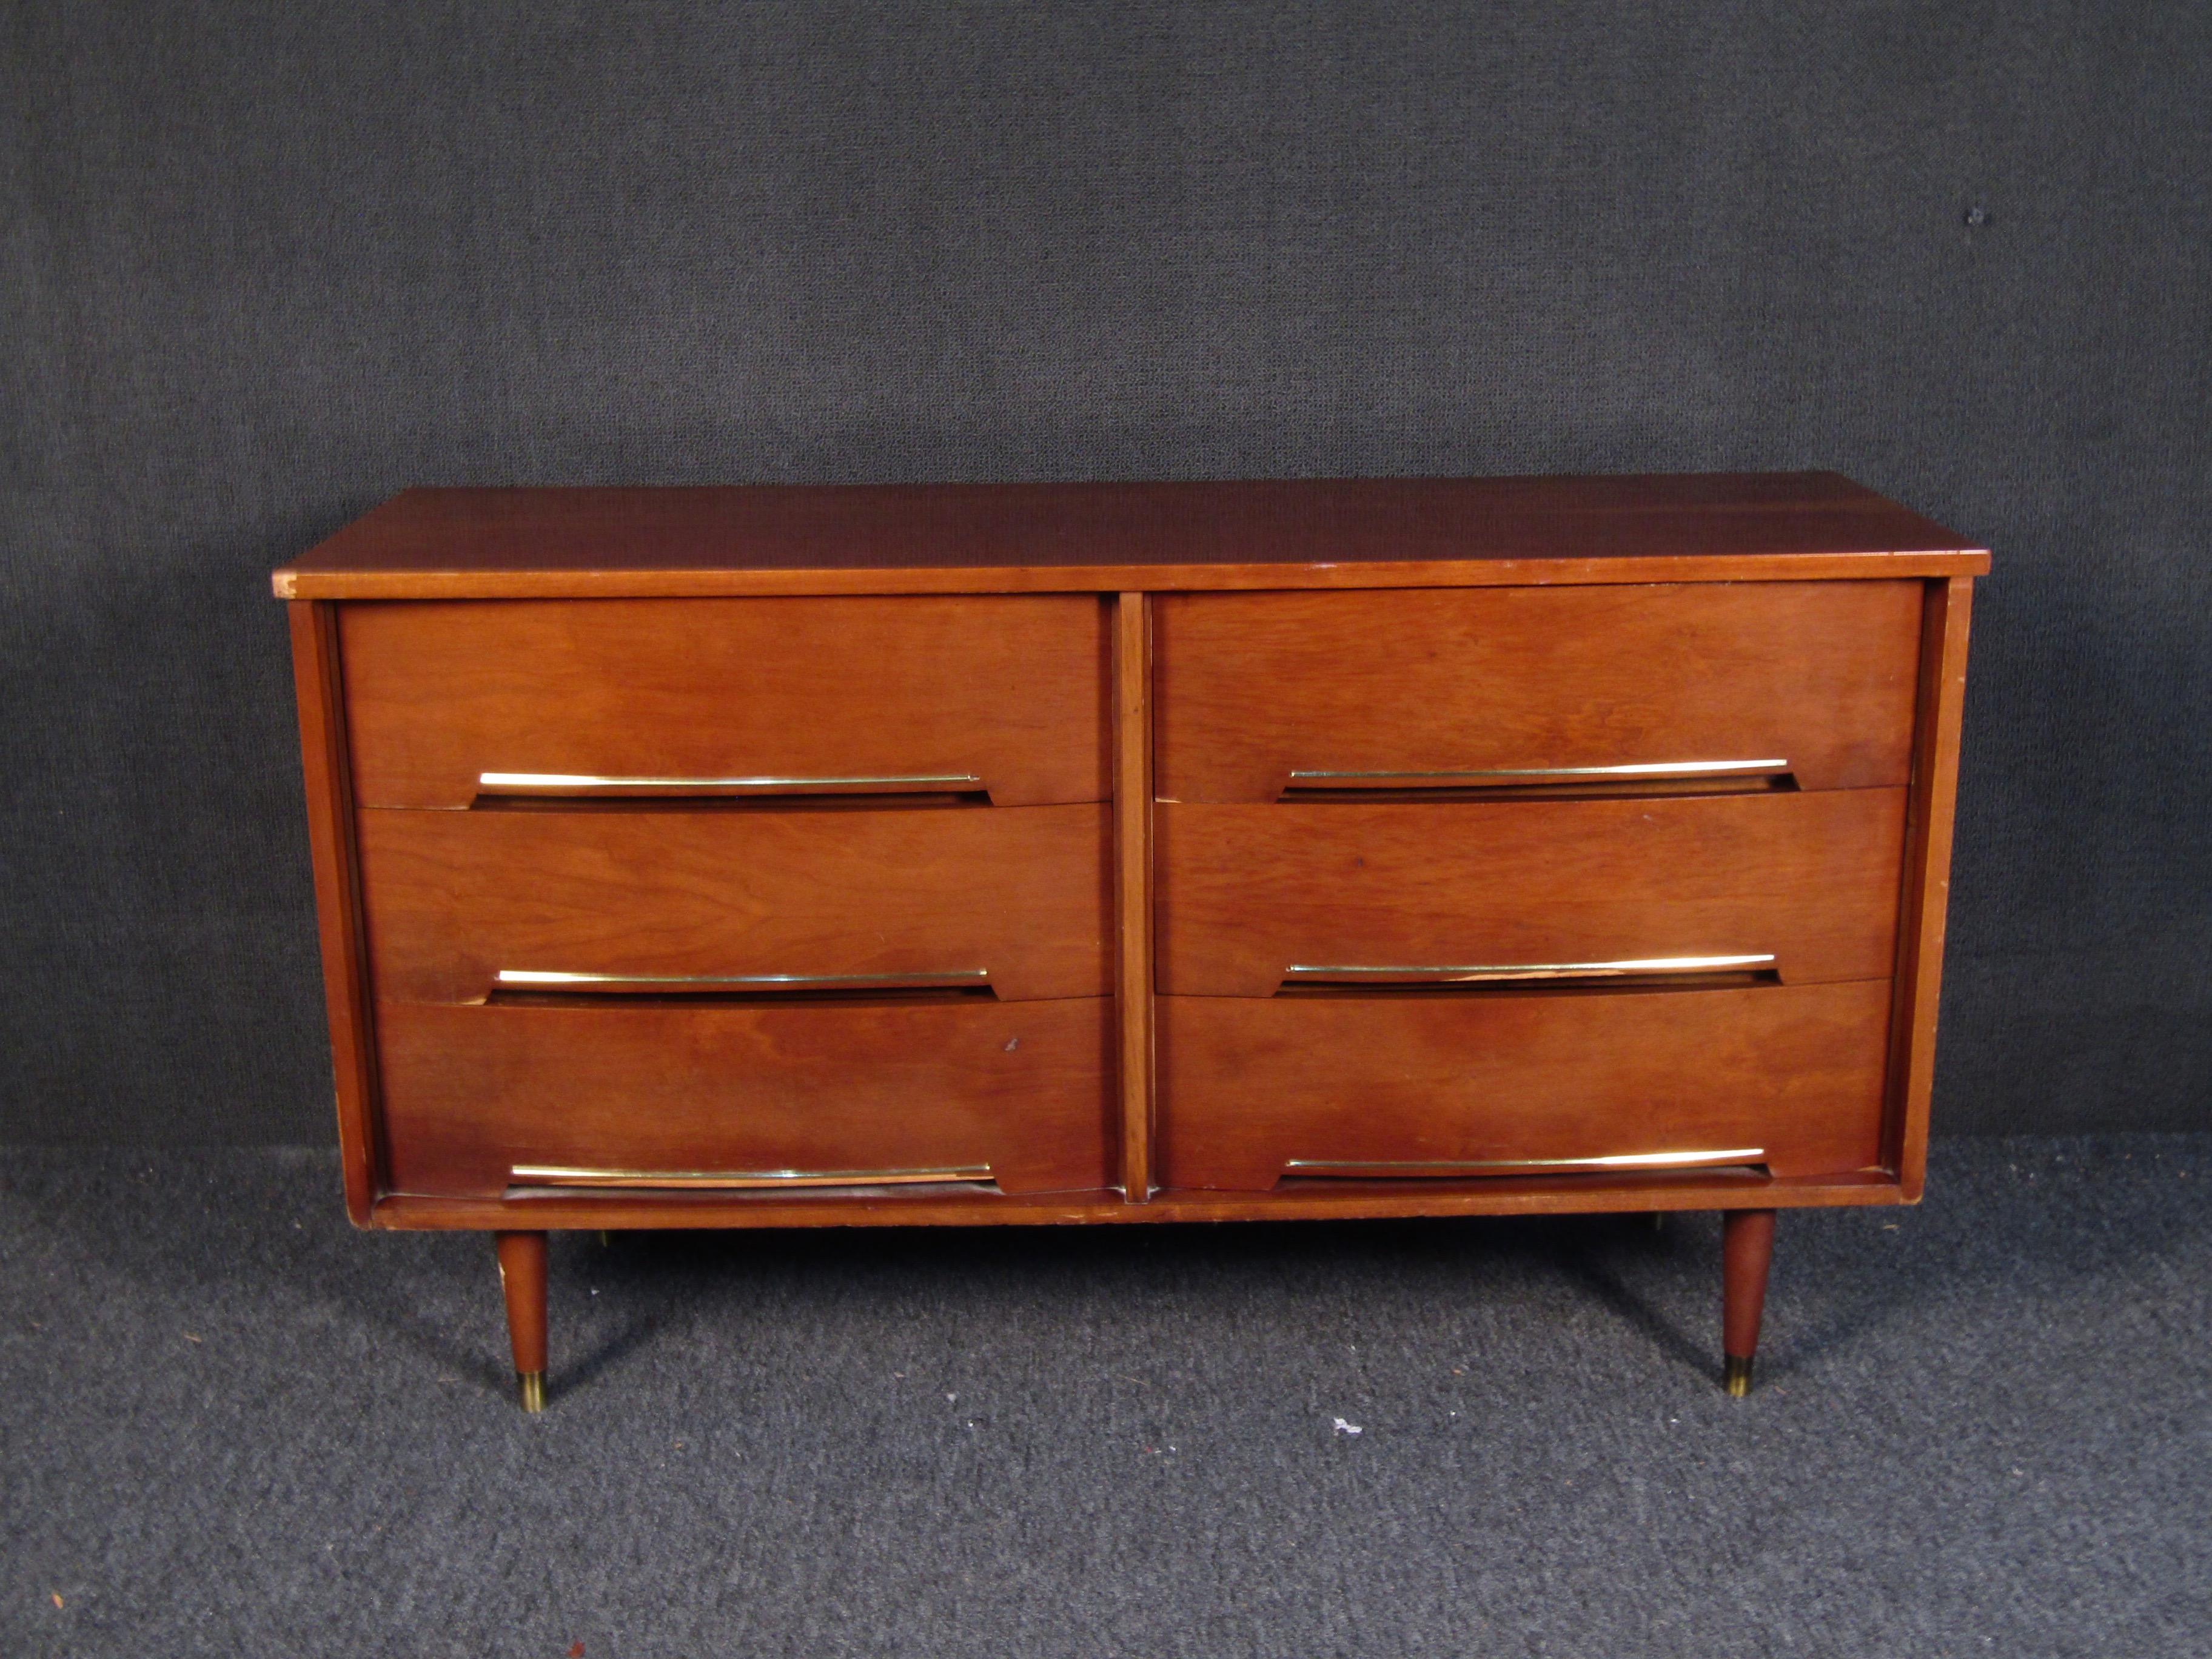 This vintage modern sturdy walnut dresser features brass inlays and inset drawer pulls. Its straightforward design and tapered brass-capped legs are sure to fit in any modern home. Confirm pickup location(ny/nj).